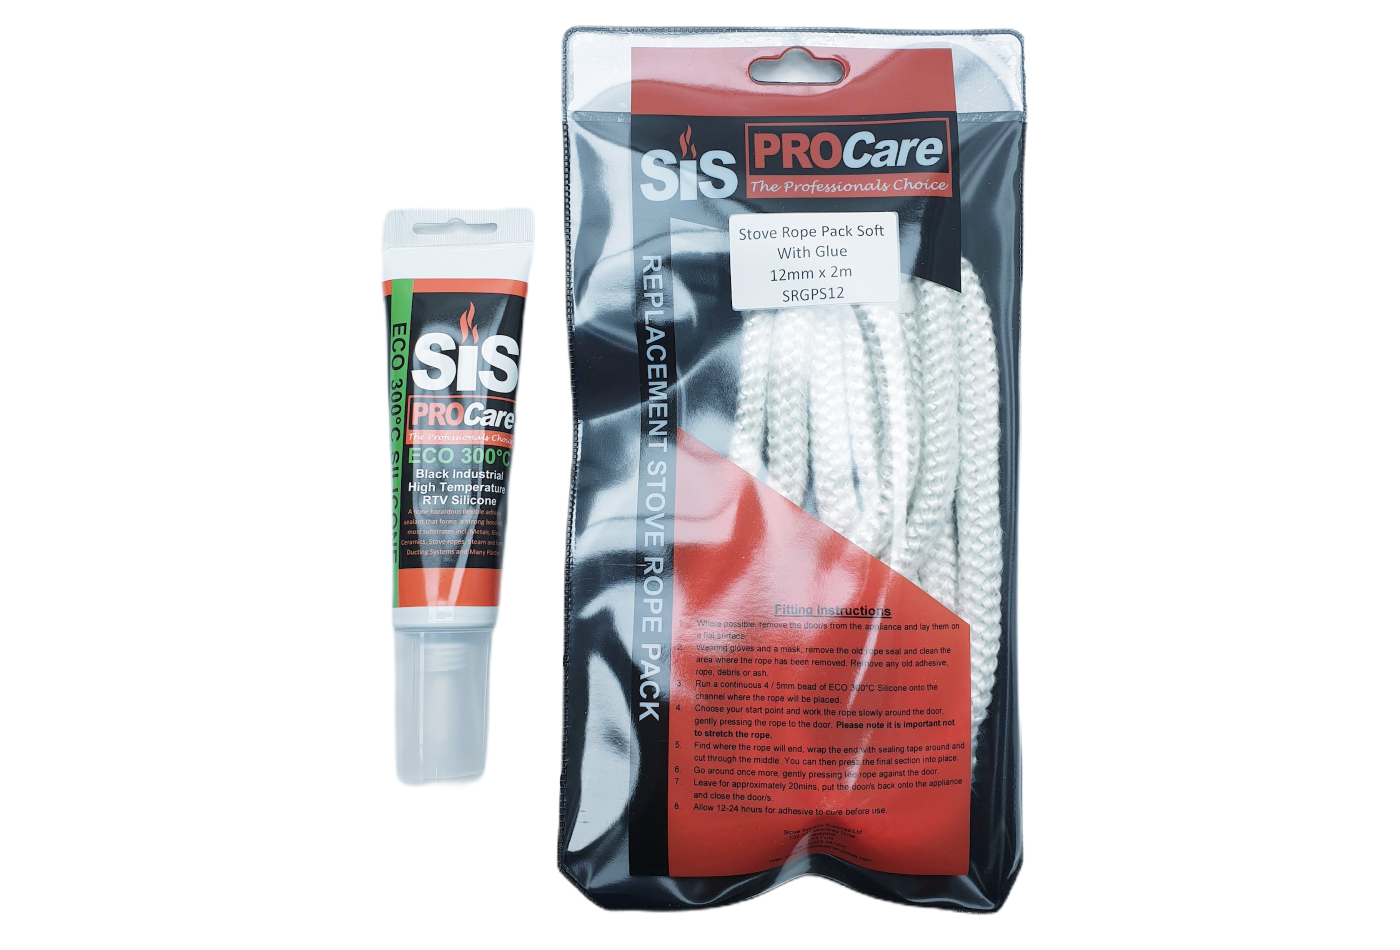 SiS Procare White 12 milimetre x 2 metre Soft Stove Rope & 80 millilitre Rope Glue Pack - product code SRGPS12